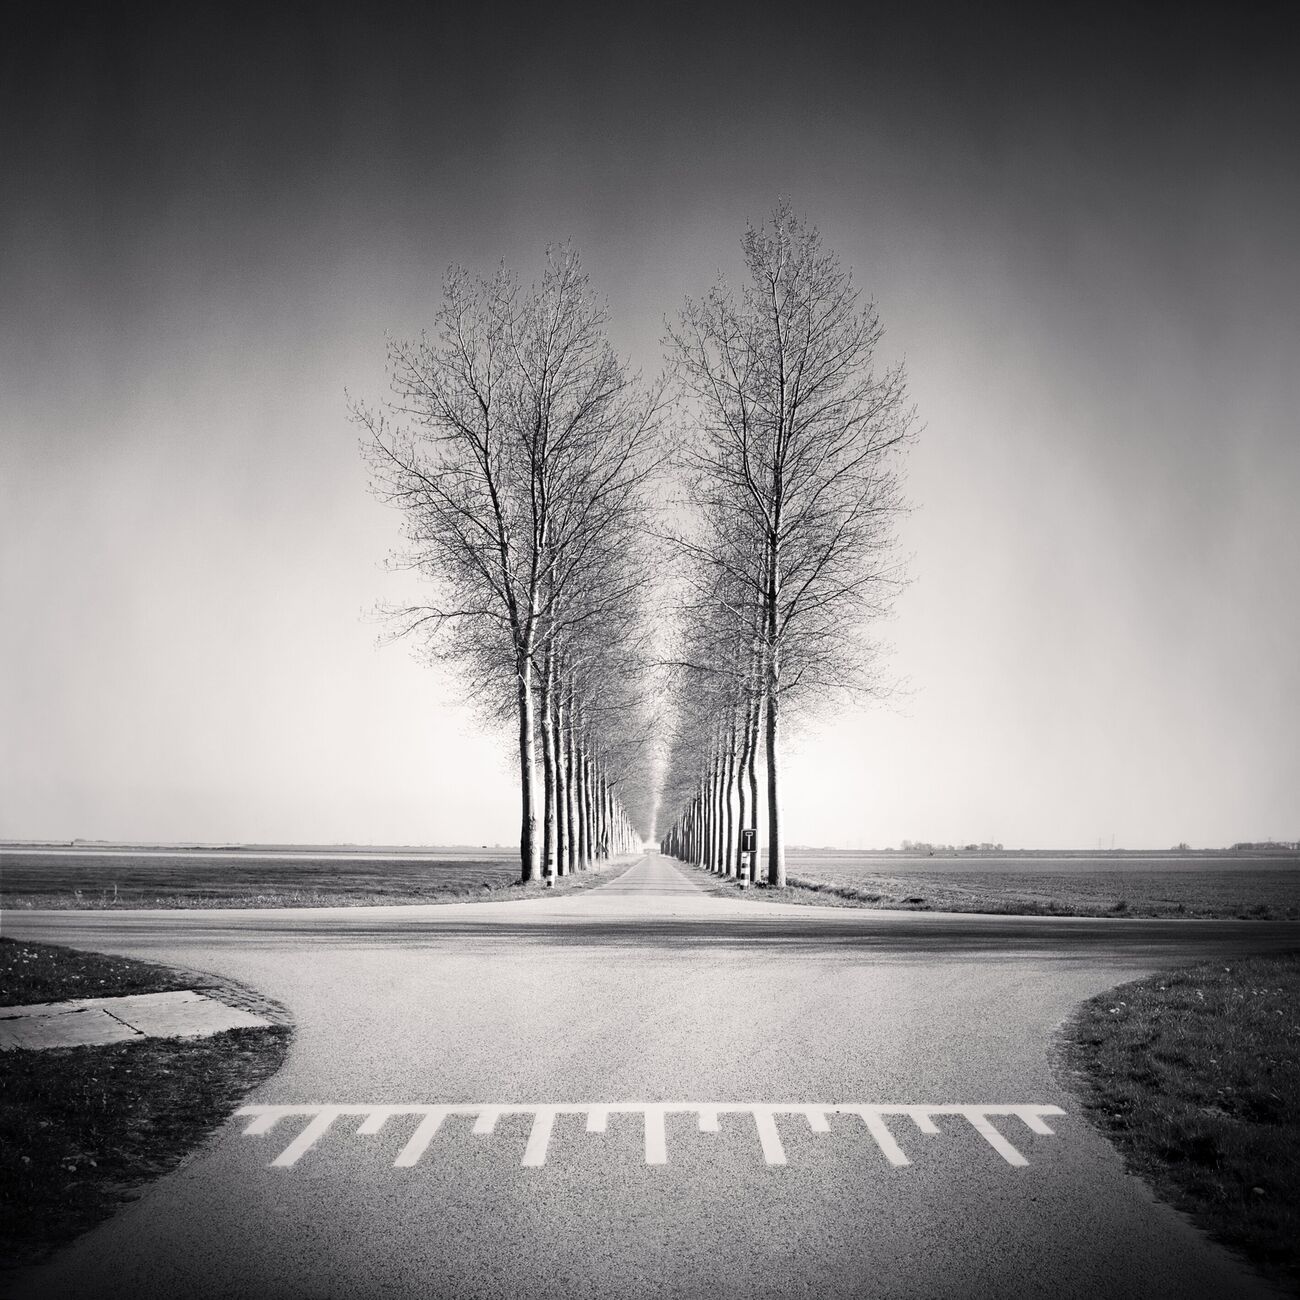 Crossing The Lines, The Netherlands, Pays-Bas. Avril 2015. Ref-1313 - Denis Olivier Photographie